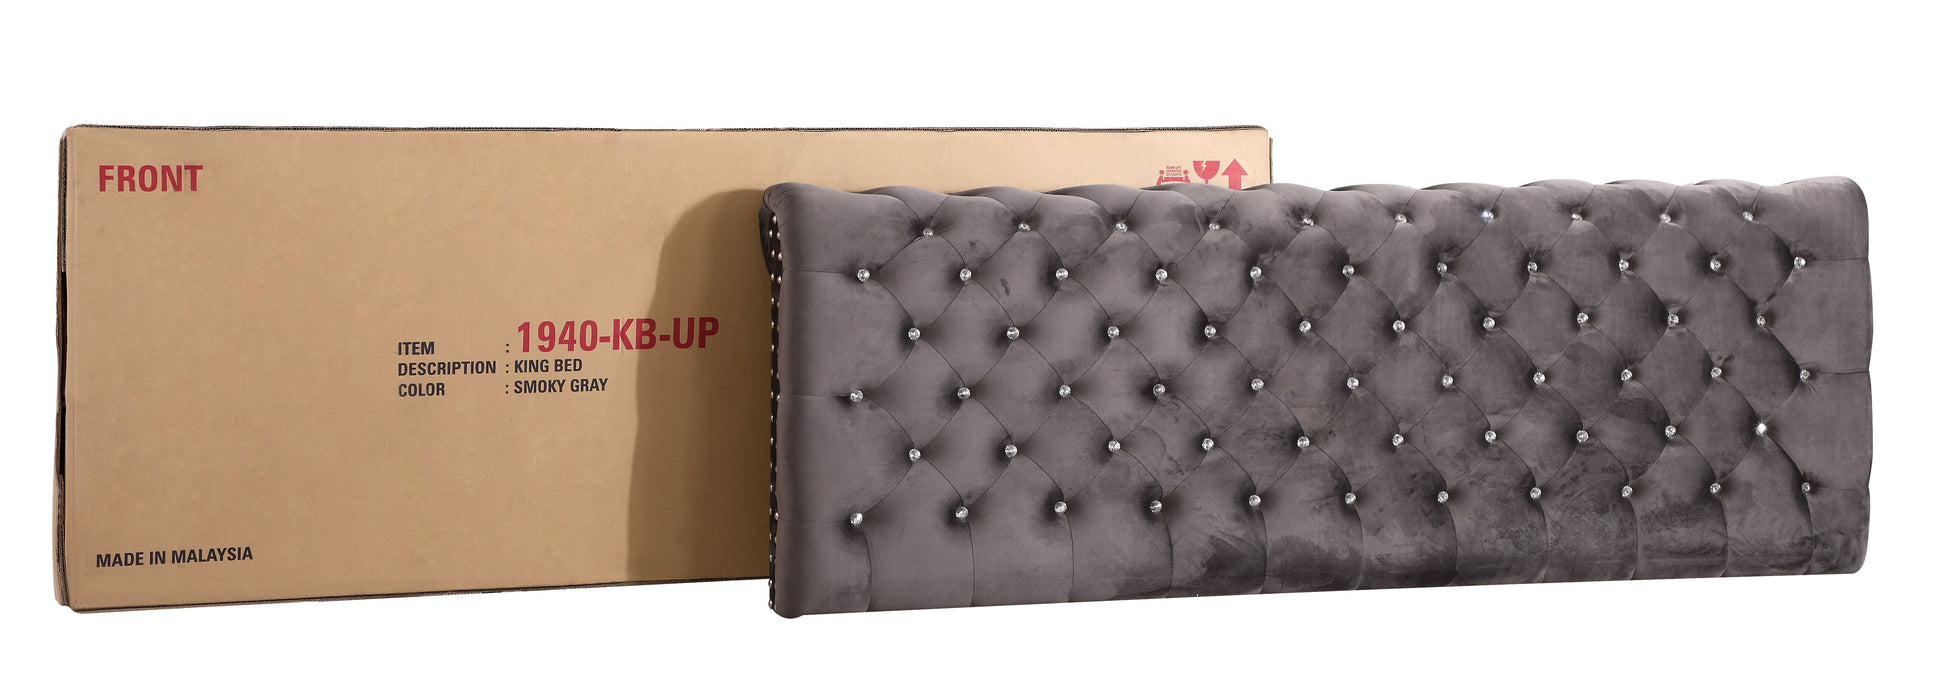 Maxx - G1940-KB-UP Tufted Upholstered Bed - Gray